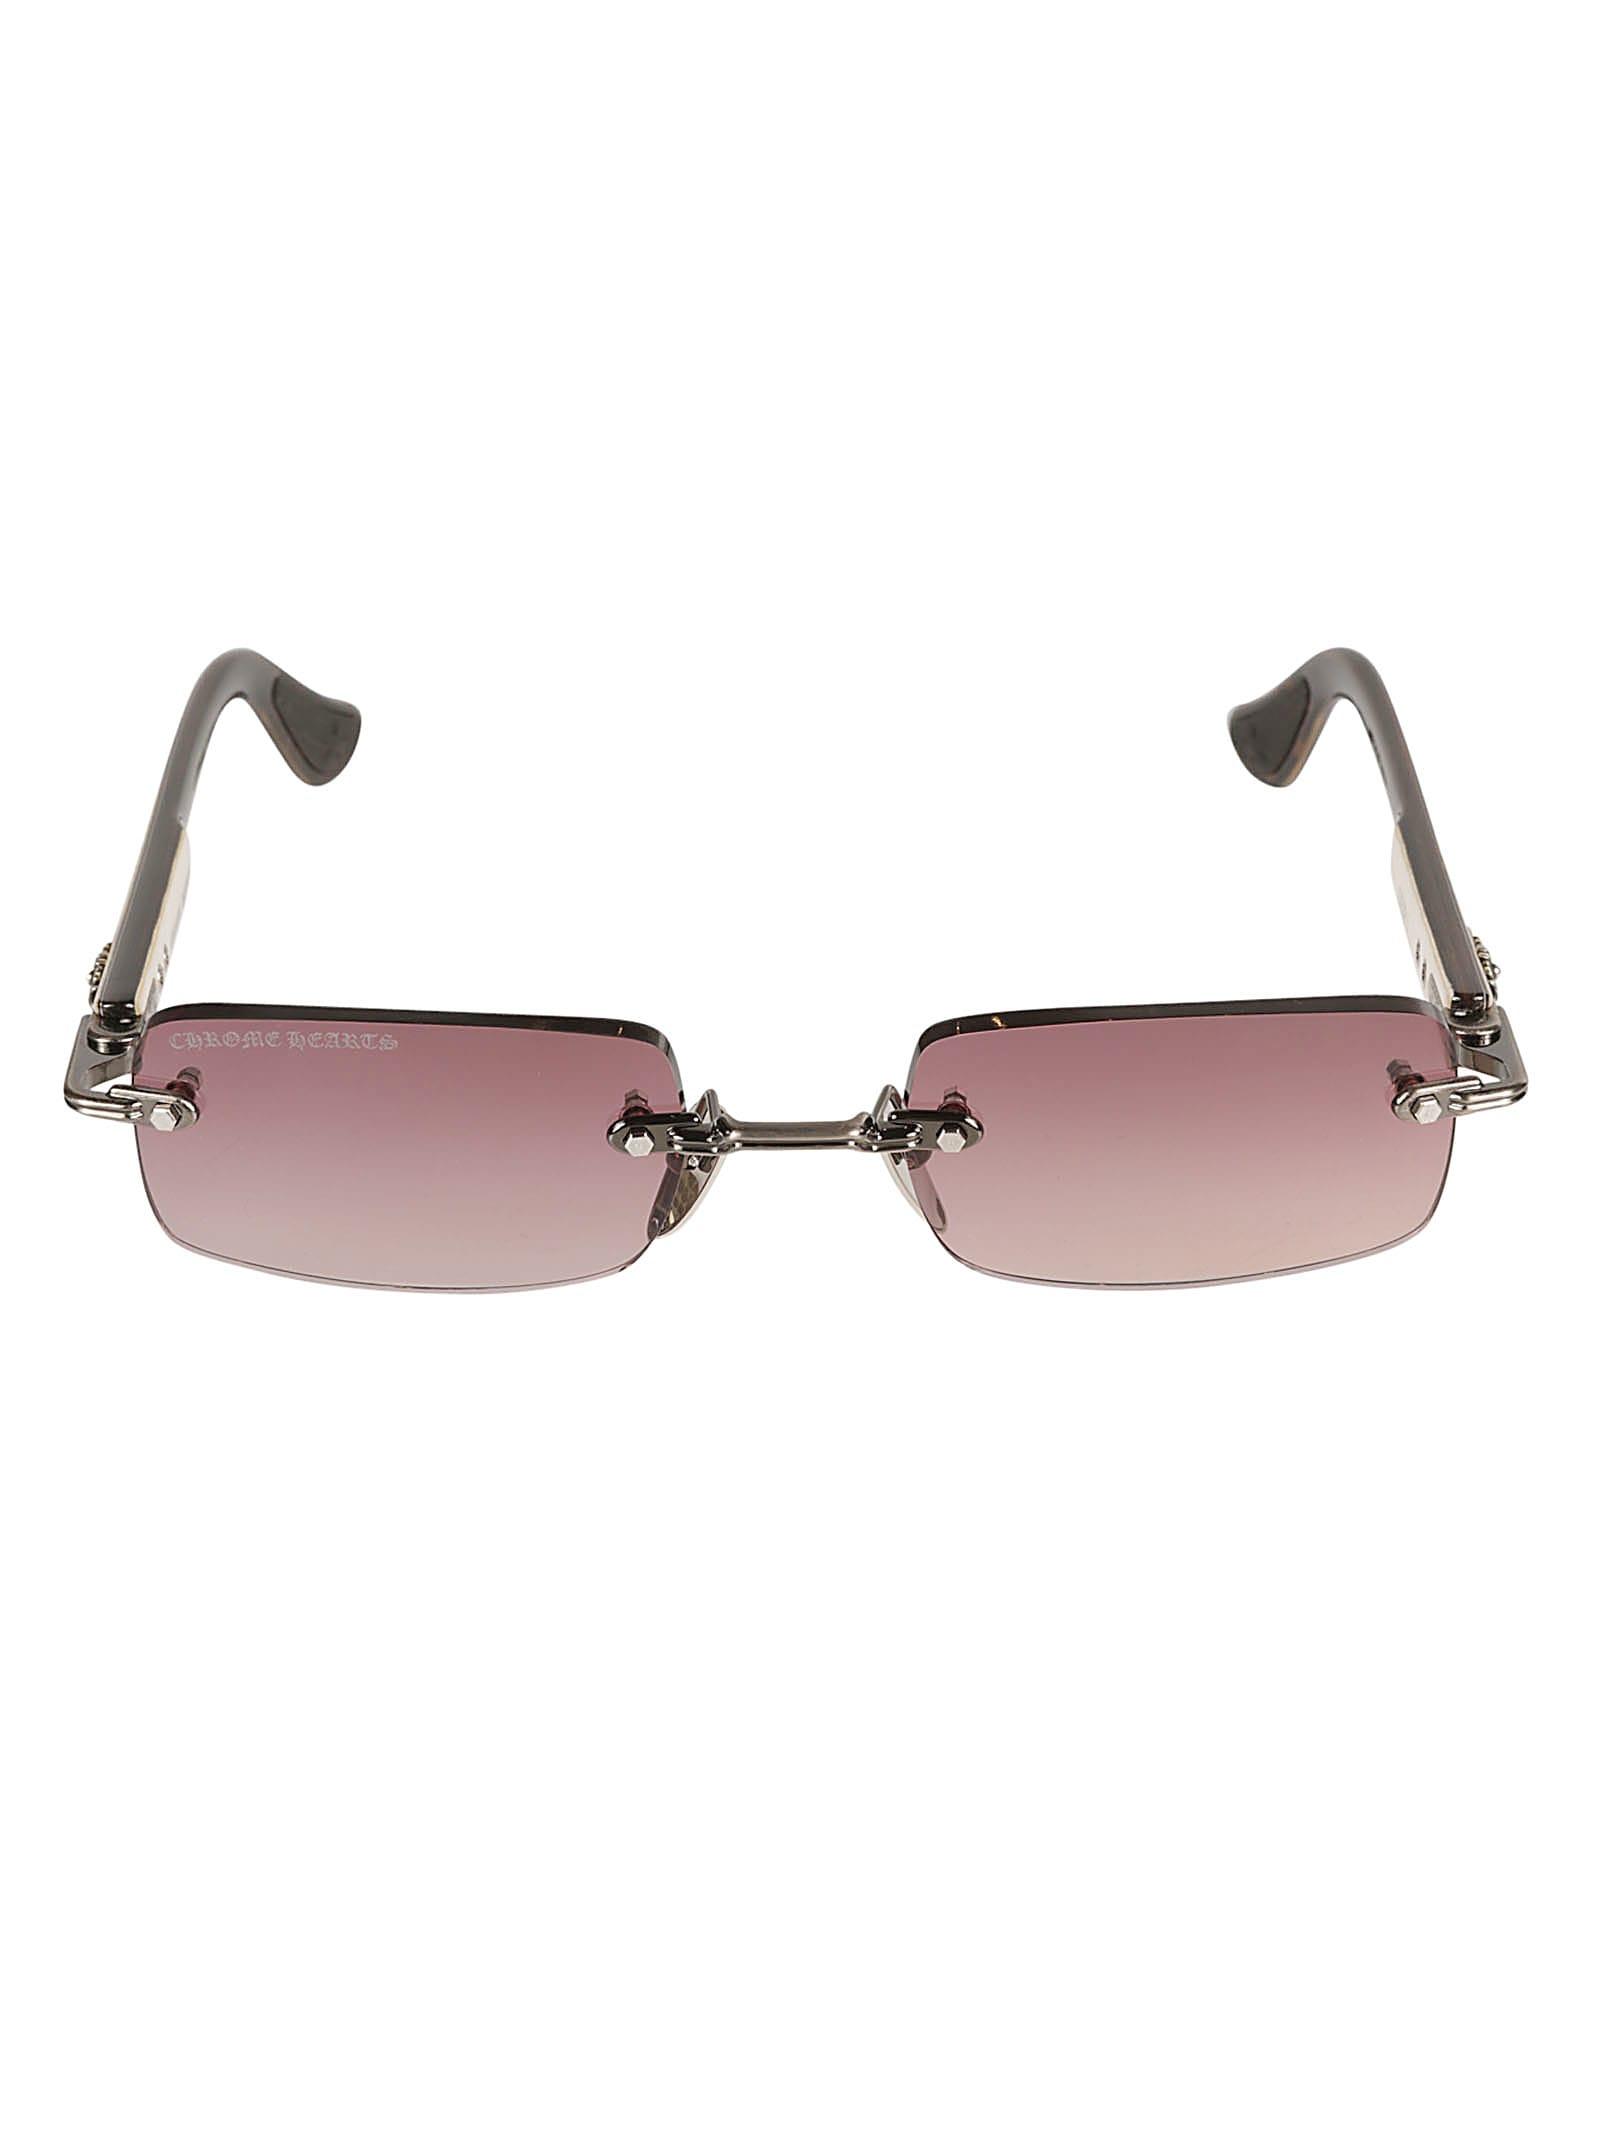 Chrome Hearts Rectangle Rimless Sunglasses in Brown | Lyst